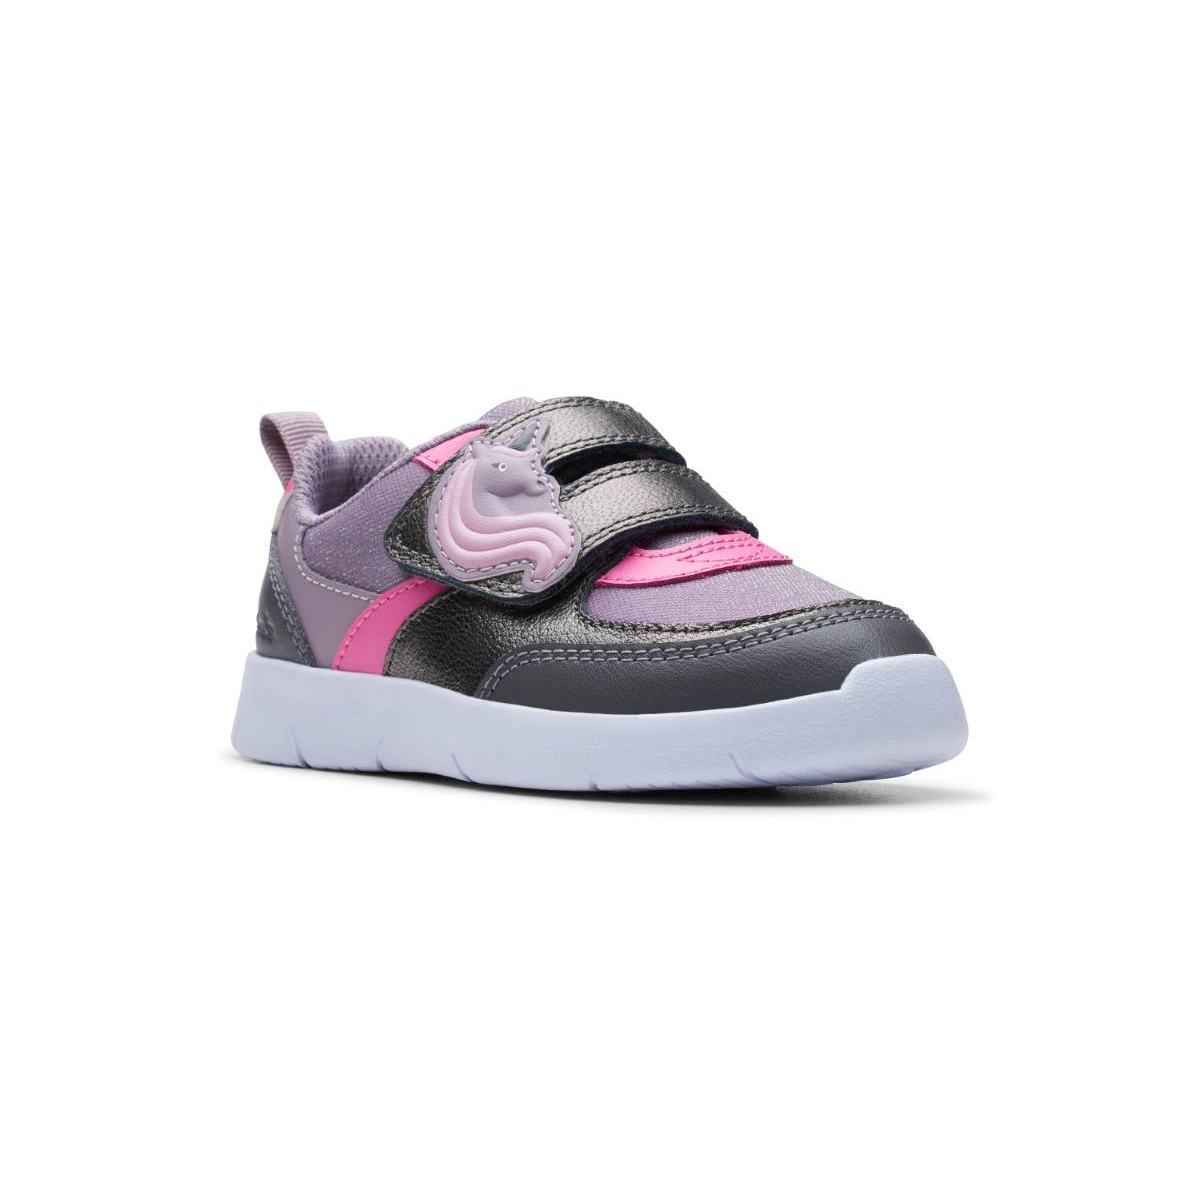 Clarks Ath Shimmer K Purple multi Kids toddler girls trainers 7645-76F in a Plain Leather in Size 8